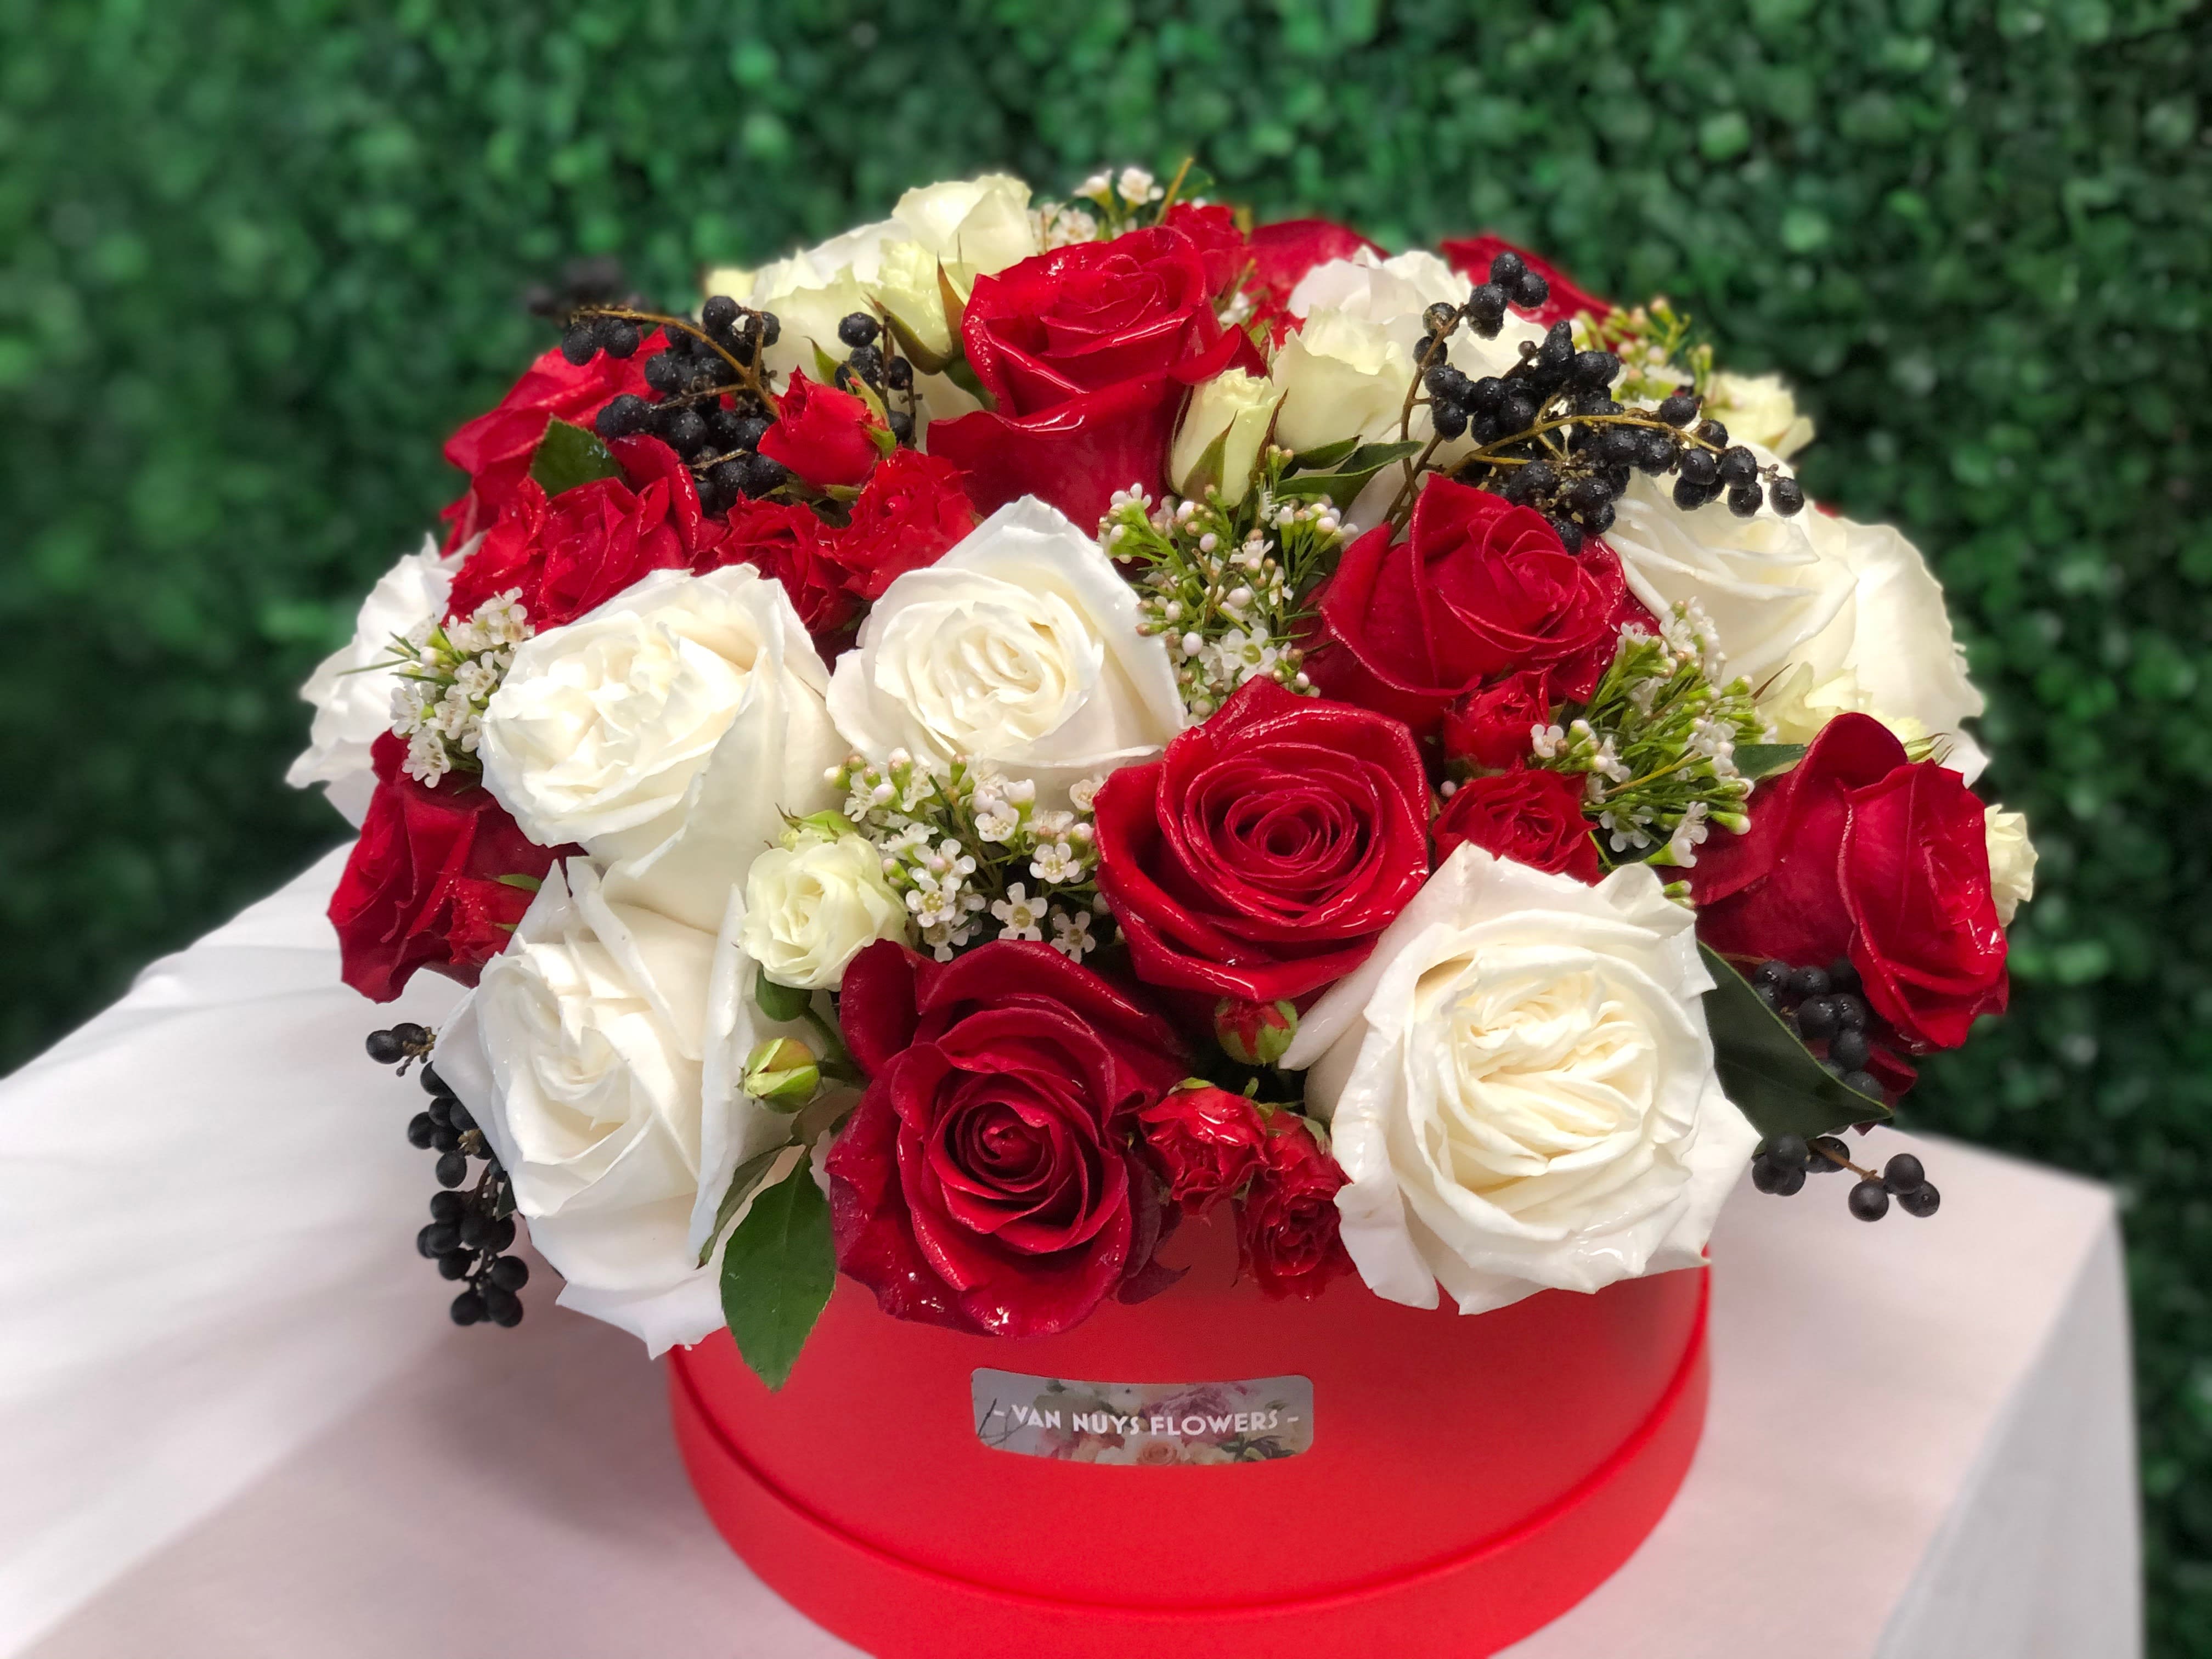 JUST YOU AND ME  - A BEAUTUFUL BLEND OF RED AND WHITE ROSES IN A FLORAL BOX MAKES FOR A STUNNING FLORAL. ROSES,SPRAY ROSE, WAX FLOWER, VIBURNUM BERRY